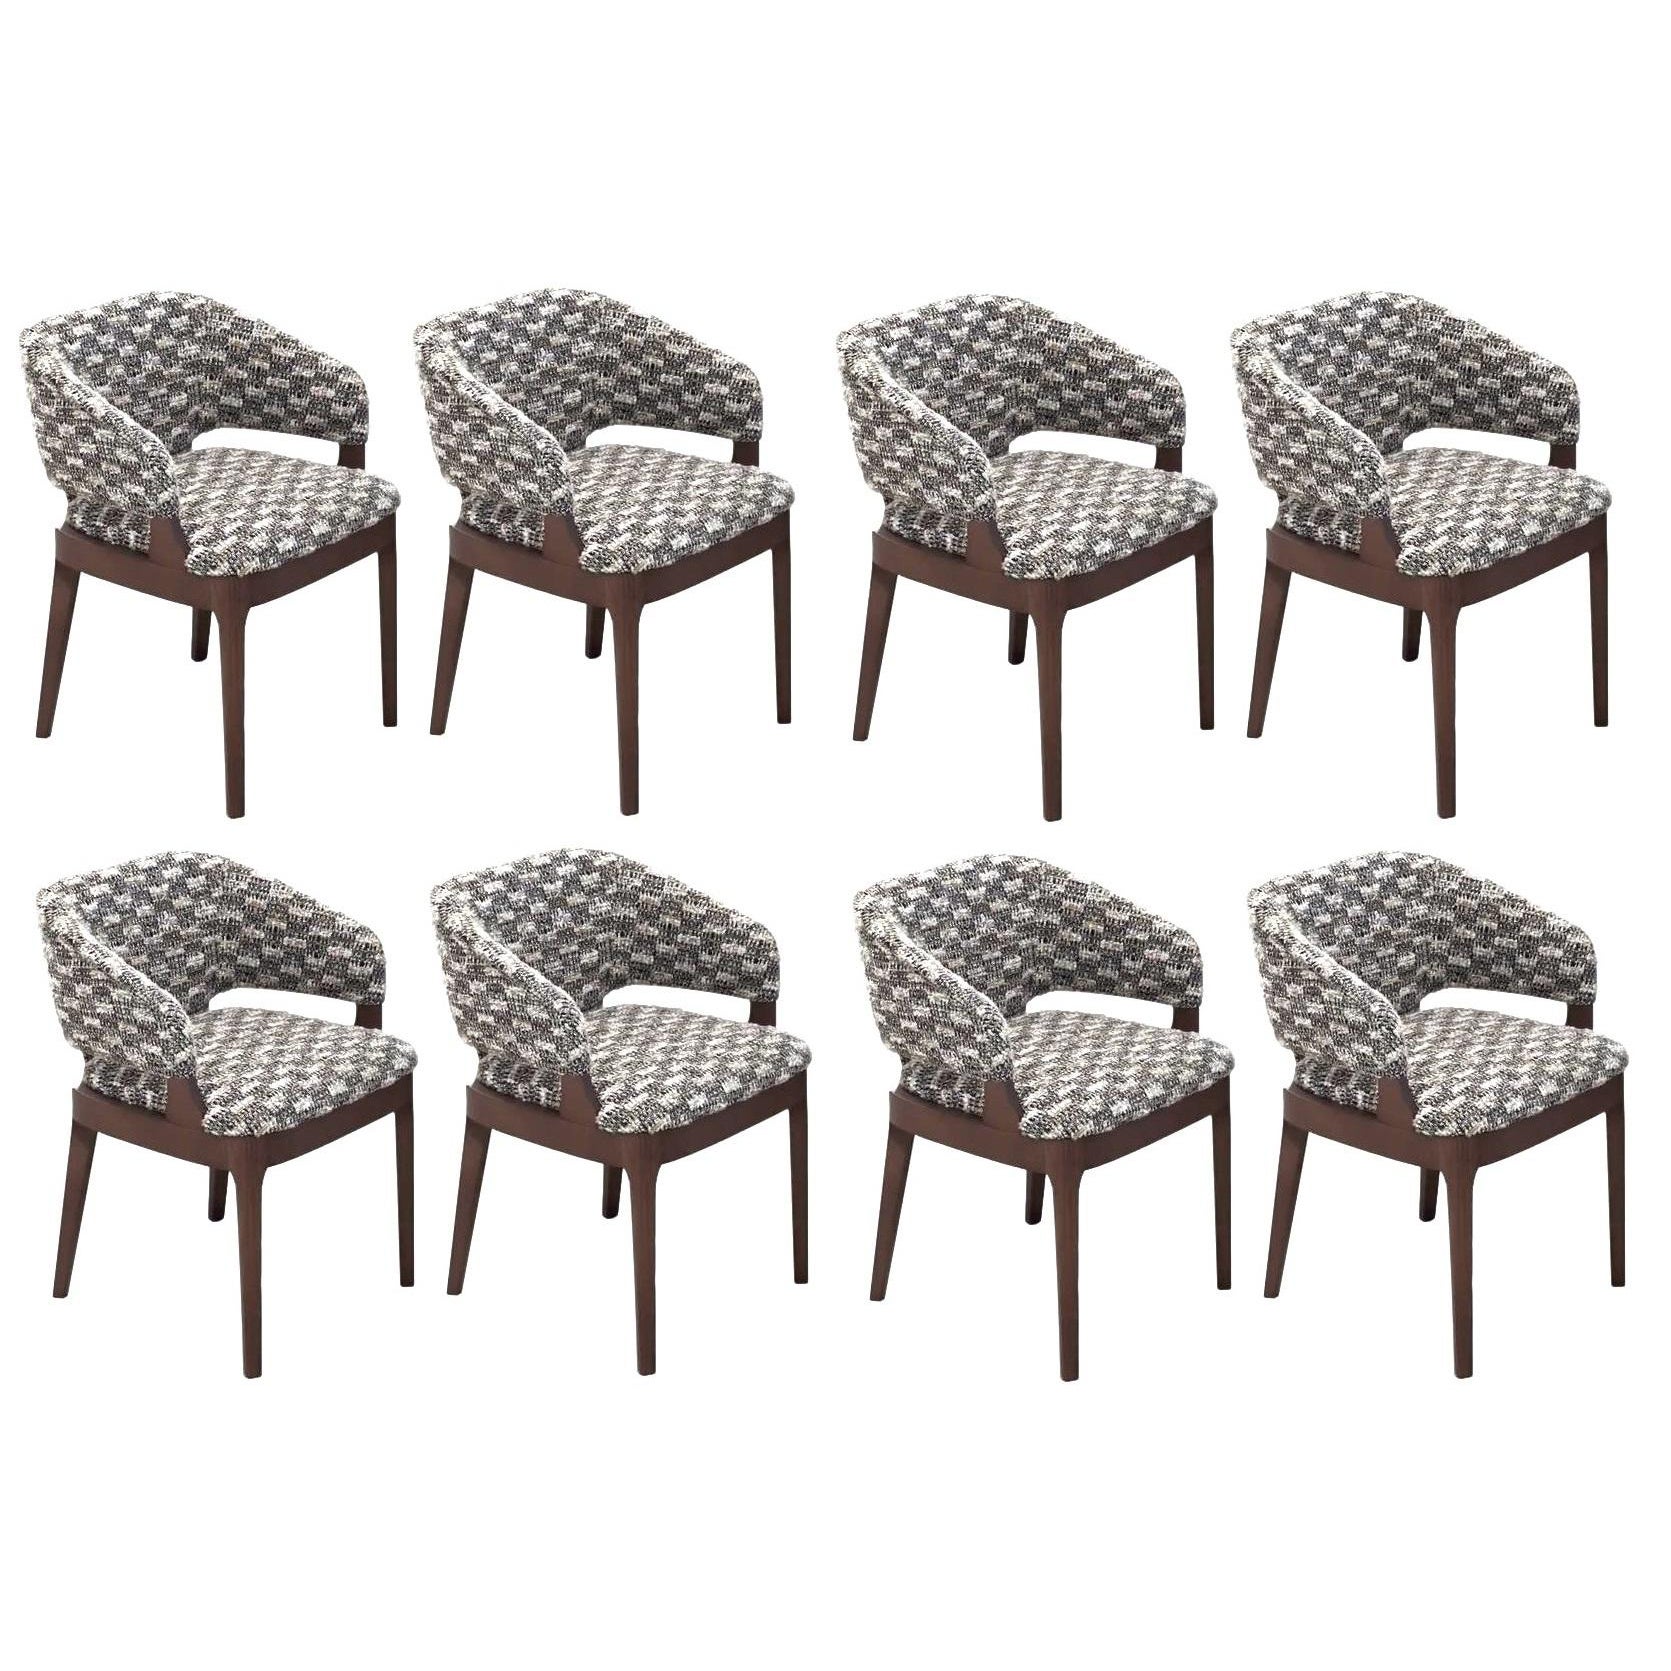 Set of 8 Dining Chair With Arms Offered In COM For Sale